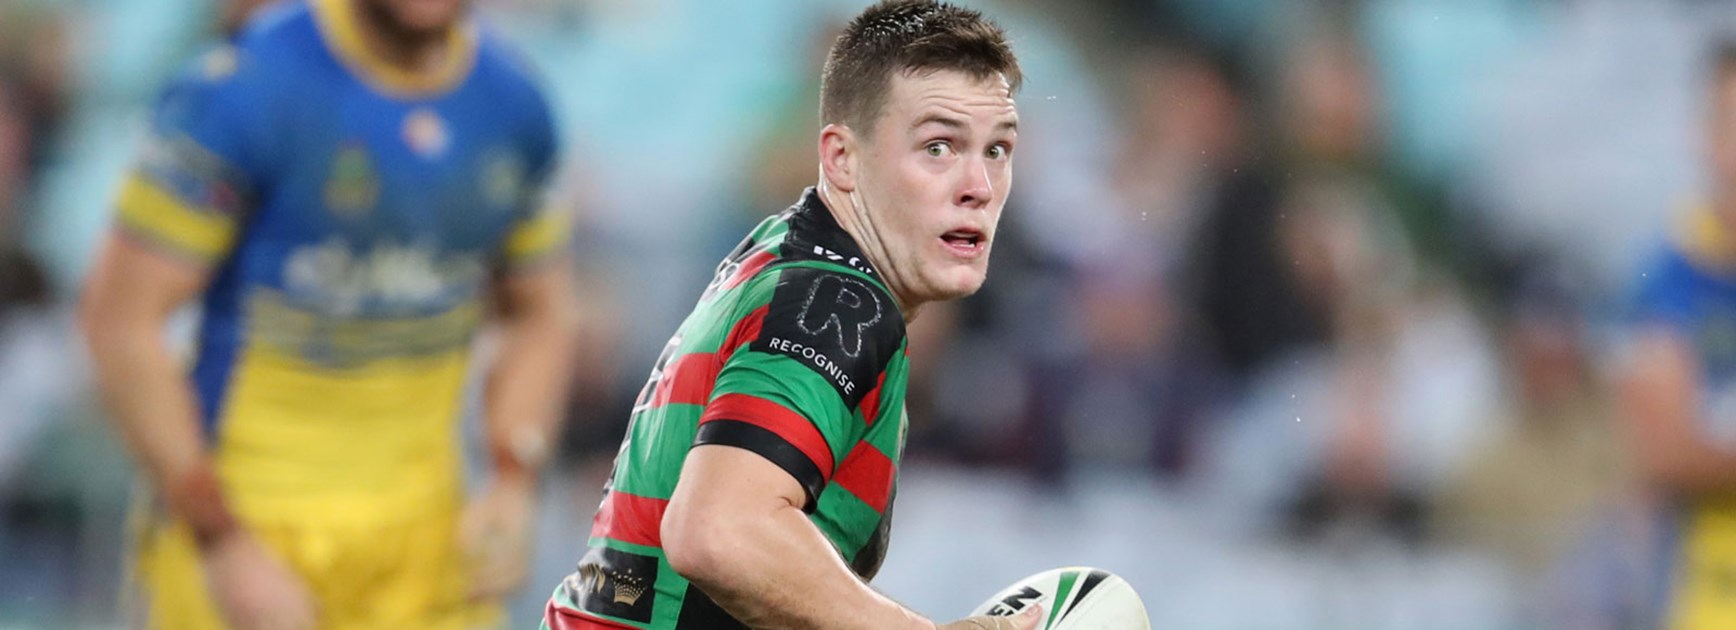 Rabbitohs playmaker Luke Keary is on his way to the Roosters in 2017.